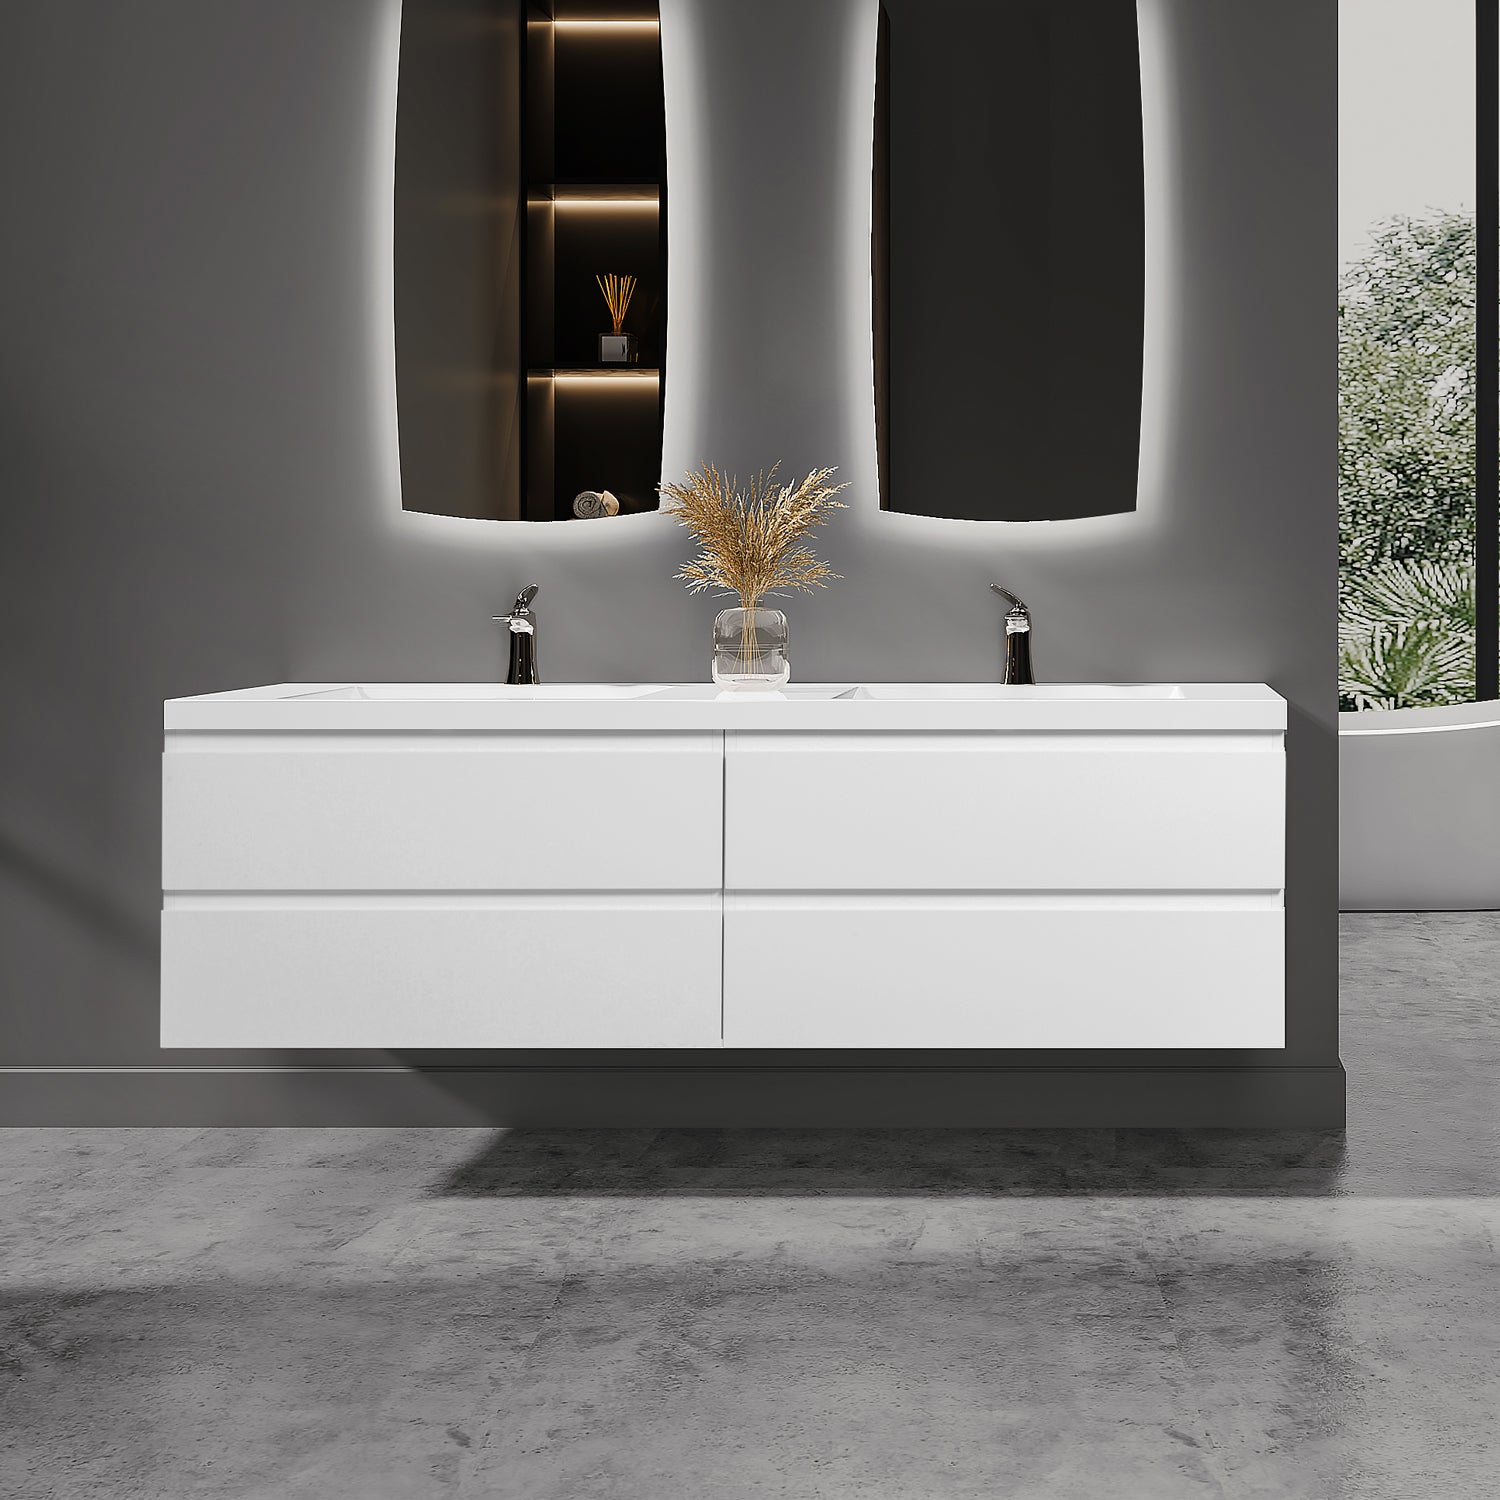 Sinber 72" Wall Mounted Double Rectangular Sink Bathroom Vanity Cabinet with White Acrylic Countertop 2 Doors and 4 Drawers, Compact and Elegant with Sleek Design for Modern Bathrooms